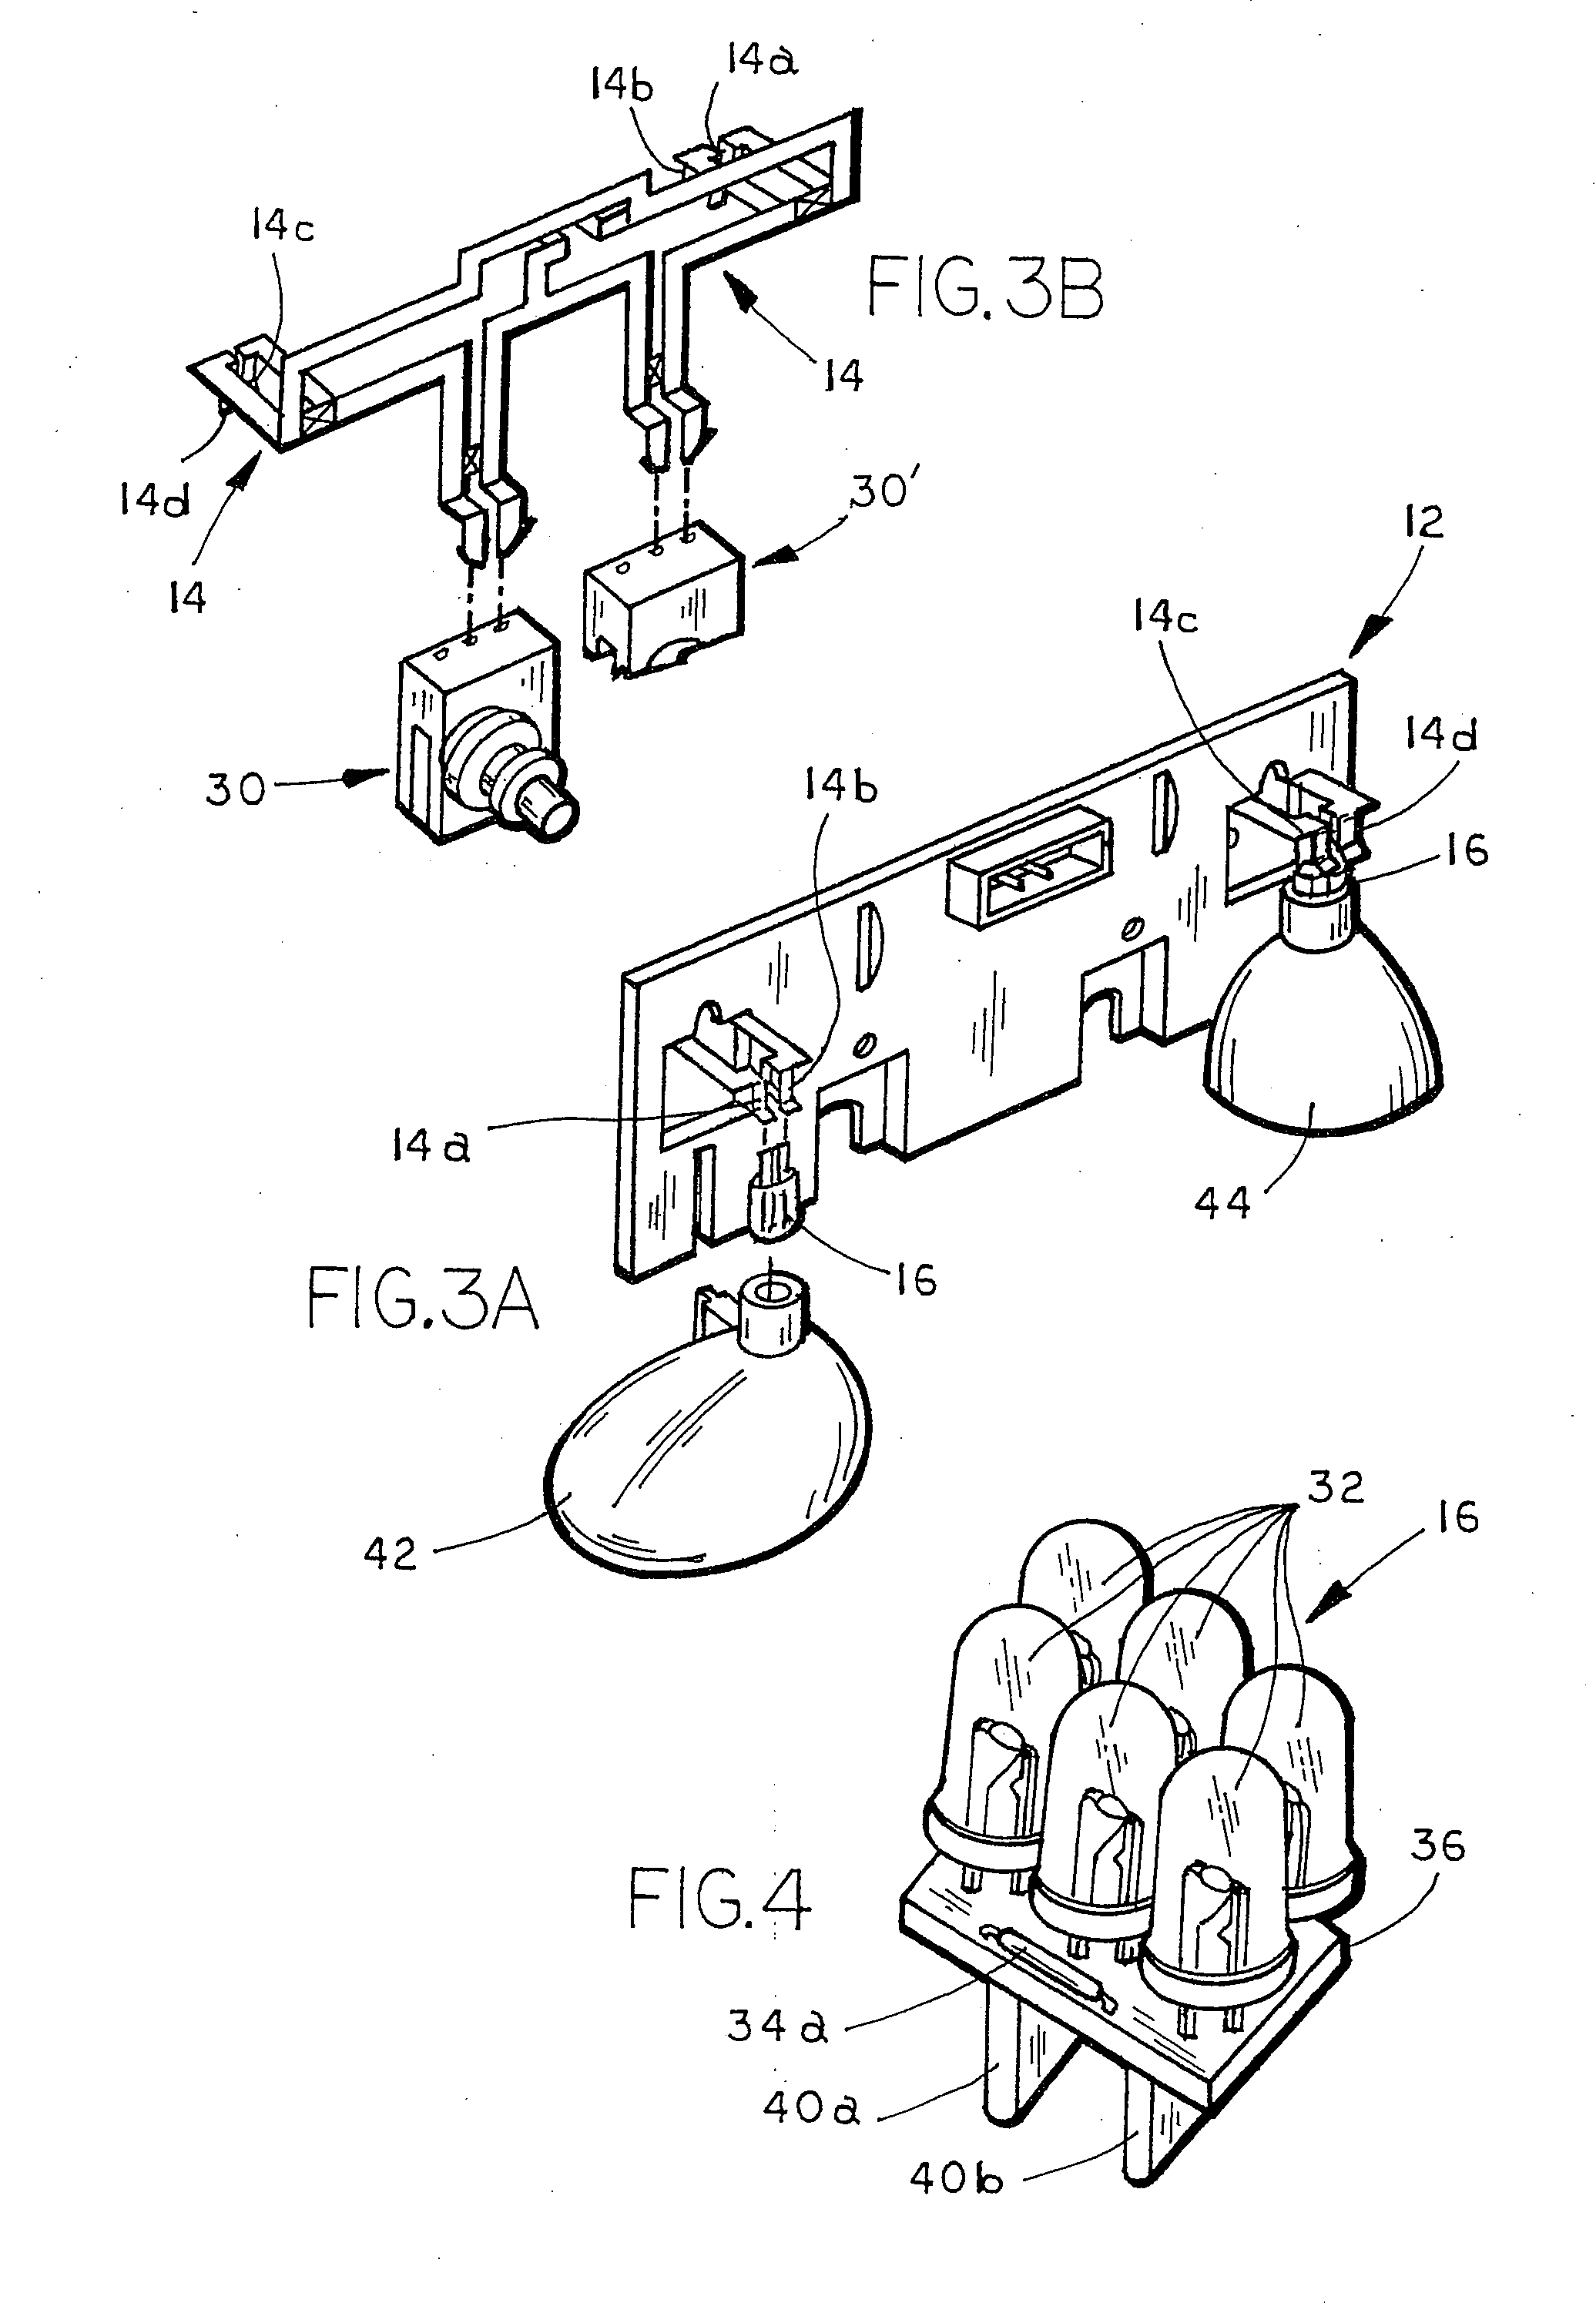 Lighting system for a vehicle